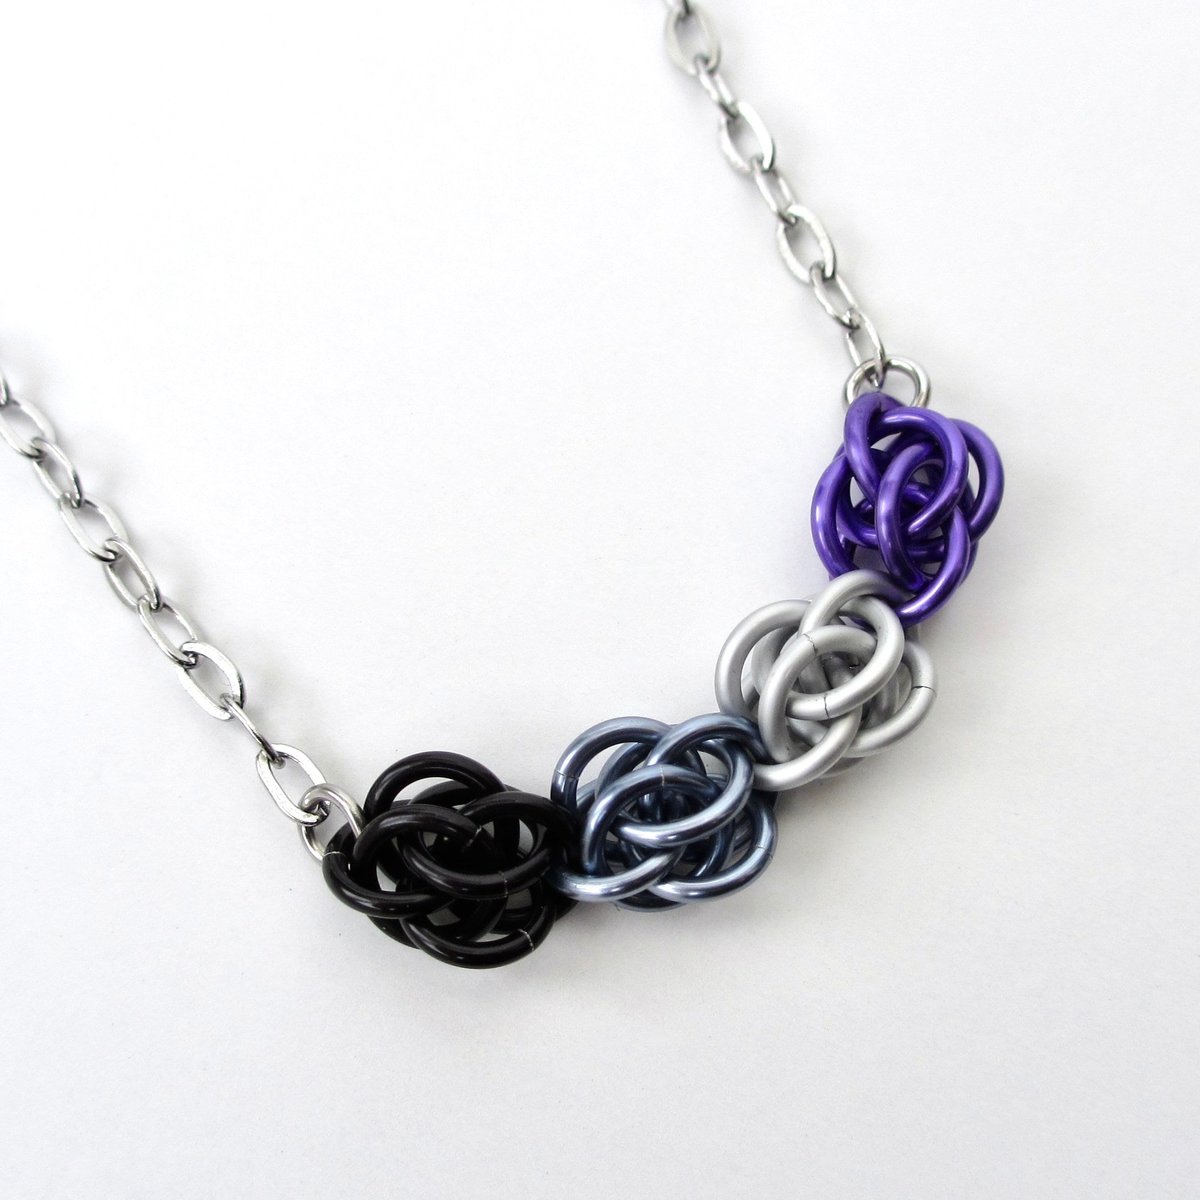 Ace pride necklace, chainmail Sweetpea weave, asexual pride jewelry